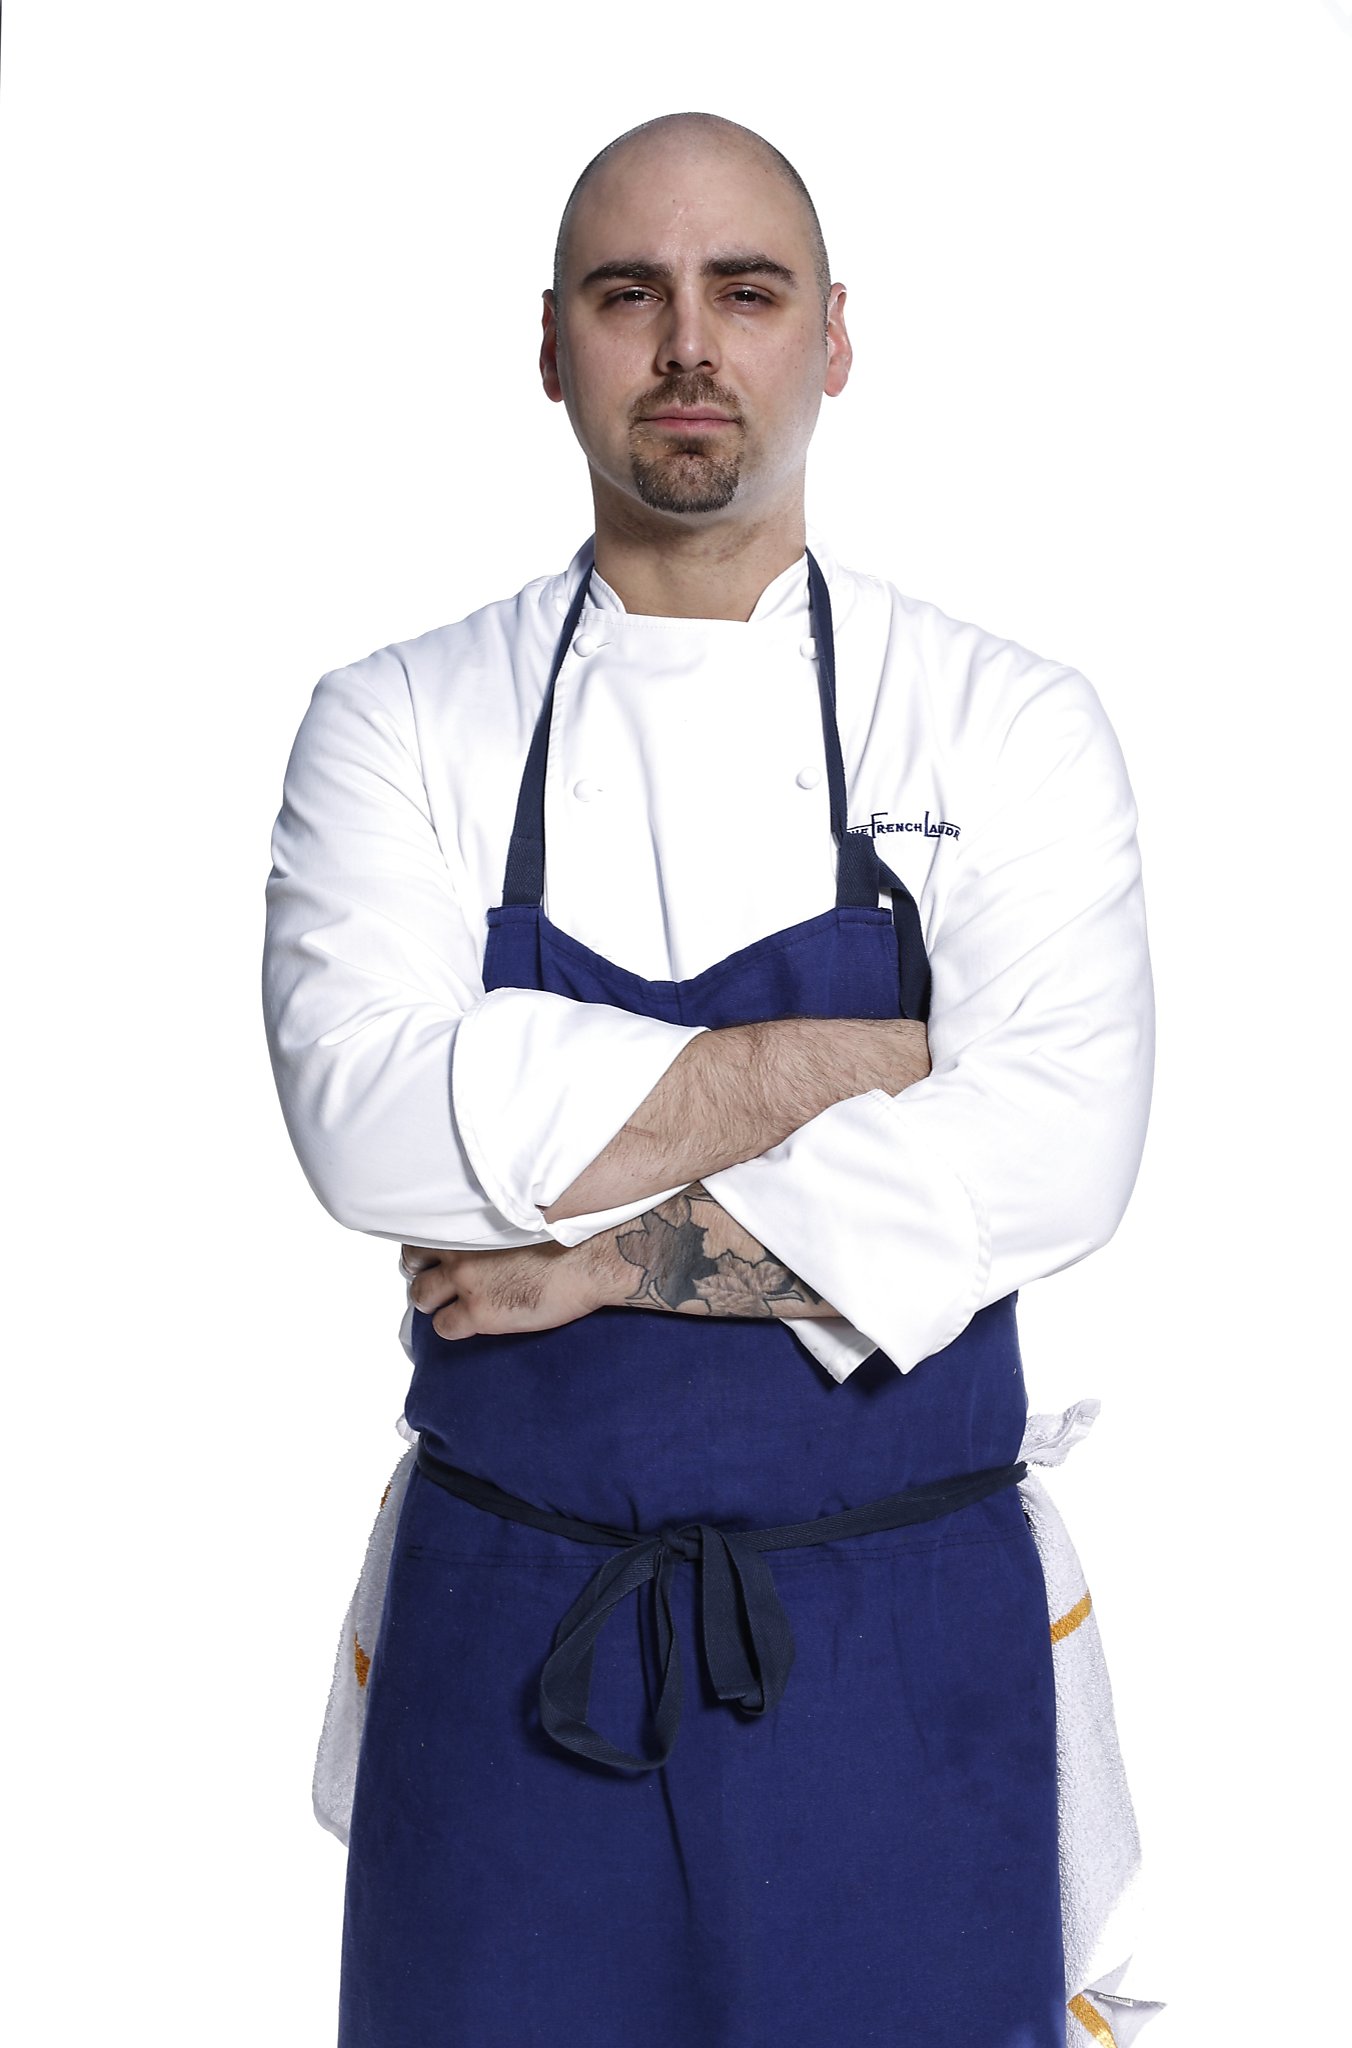 Why Chef Uniforms Are Important￼ - Laundryheap Blog - Laundry